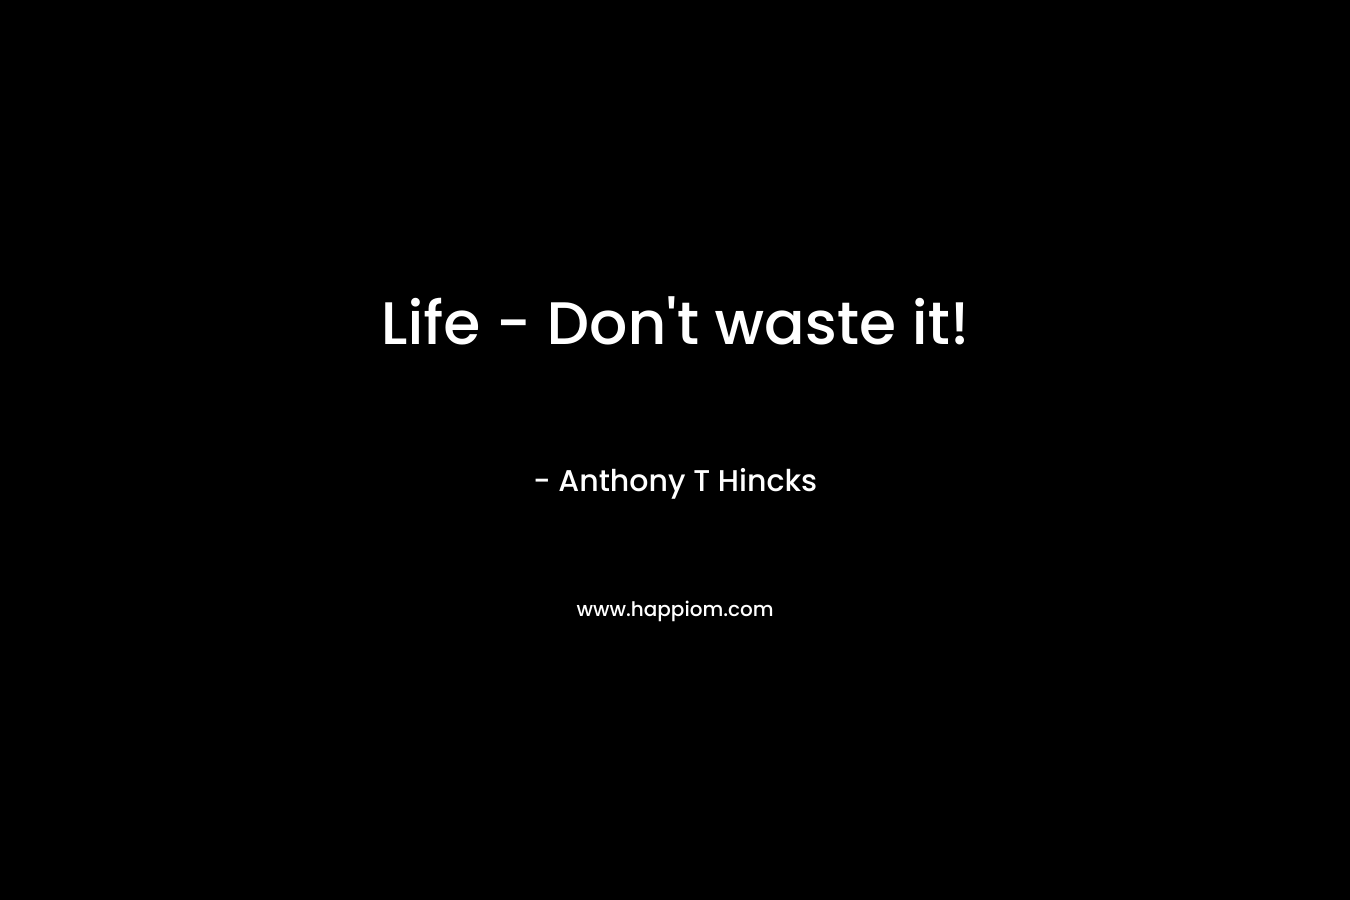 Life - Don't waste it!